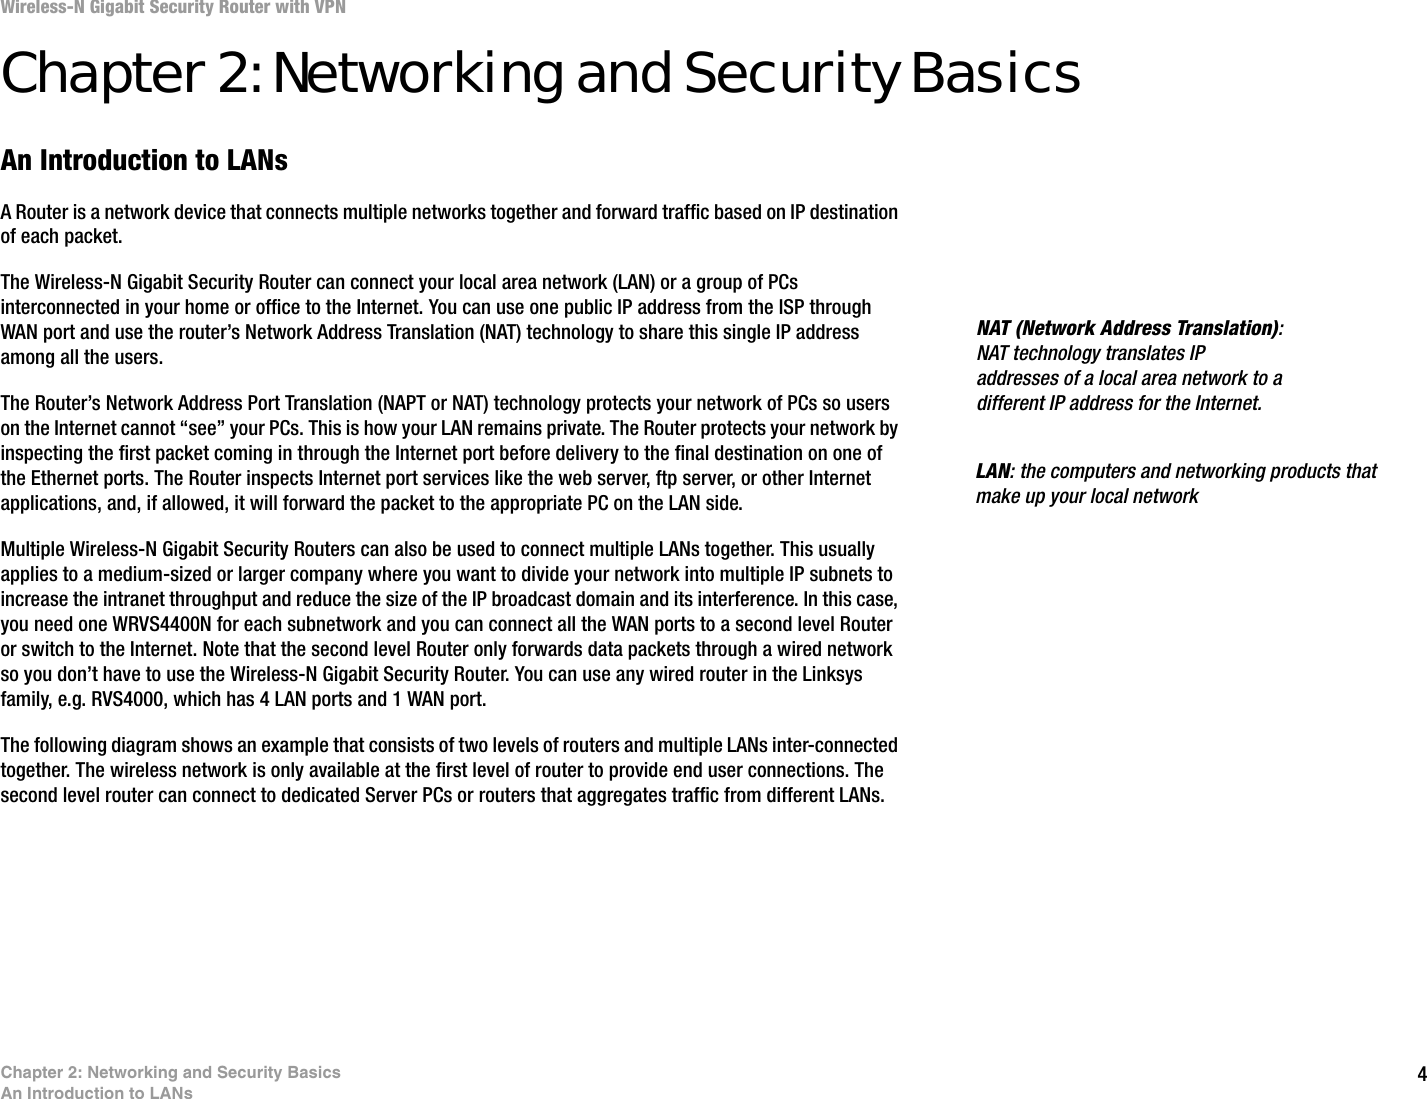 4Chapter 2: Networking and Security BasicsAn Introduction to LANsWireless-N Gigabit Security Router with VPNChapter 2: Networking and Security BasicsAn Introduction to LANsA Router is a network device that connects multiple networks together and forward traffic based on IP destination of each packet.The Wireless-N Gigabit Security Router can connect your local area network (LAN) or a group of PCs interconnected in your home or office to the Internet. You can use one public IP address from the ISP through WAN port and use the router’s Network Address Translation (NAT) technology to share this single IP address among all the users. The Router’s Network Address Port Translation (NAPT or NAT) technology protects your network of PCs so users on the Internet cannot “see” your PCs. This is how your LAN remains private. The Router protects your network by inspecting the first packet coming in through the Internet port before delivery to the final destination on one of the Ethernet ports. The Router inspects Internet port services like the web server, ftp server, or other Internet applications, and, if allowed, it will forward the packet to the appropriate PC on the LAN side. Multiple Wireless-N Gigabit Security Routers can also be used to connect multiple LANs together. This usually applies to a medium-sized or larger company where you want to divide your network into multiple IP subnets to increase the intranet throughput and reduce the size of the IP broadcast domain and its interference. In this case, you need one WRVS4400N for each subnetwork and you can connect all the WAN ports to a second level Router or switch to the Internet. Note that the second level Router only forwards data packets through a wired network so you don’t have to use the Wireless-N Gigabit Security Router. You can use any wired router in the Linksys family, e.g. RVS4000, which has 4 LAN ports and 1 WAN port. The following diagram shows an example that consists of two levels of routers and multiple LANs inter-connected together. The wireless network is only available at the first level of router to provide end user connections. The second level router can connect to dedicated Server PCs or routers that aggregates traffic from different LANs. NAT (Network Address Translation): NAT technology translates IP addresses of a local area network to a different IP address for the Internet. LAN: the computers and networking products that make up your local network